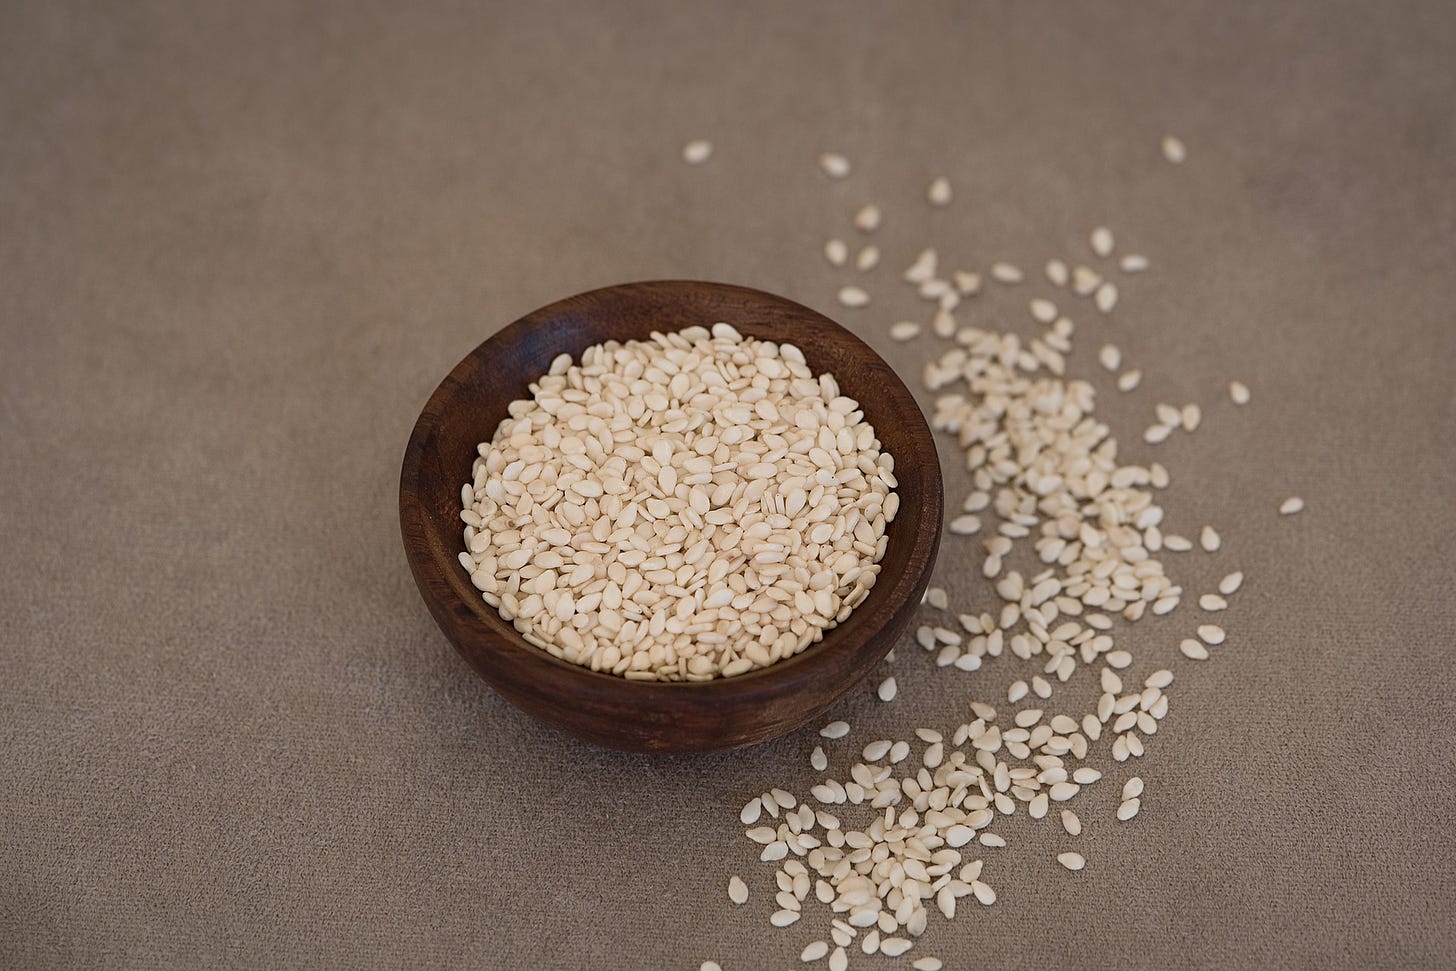 A bowl containing sesame seeds, there are also seeds spread in an arch on the right side.